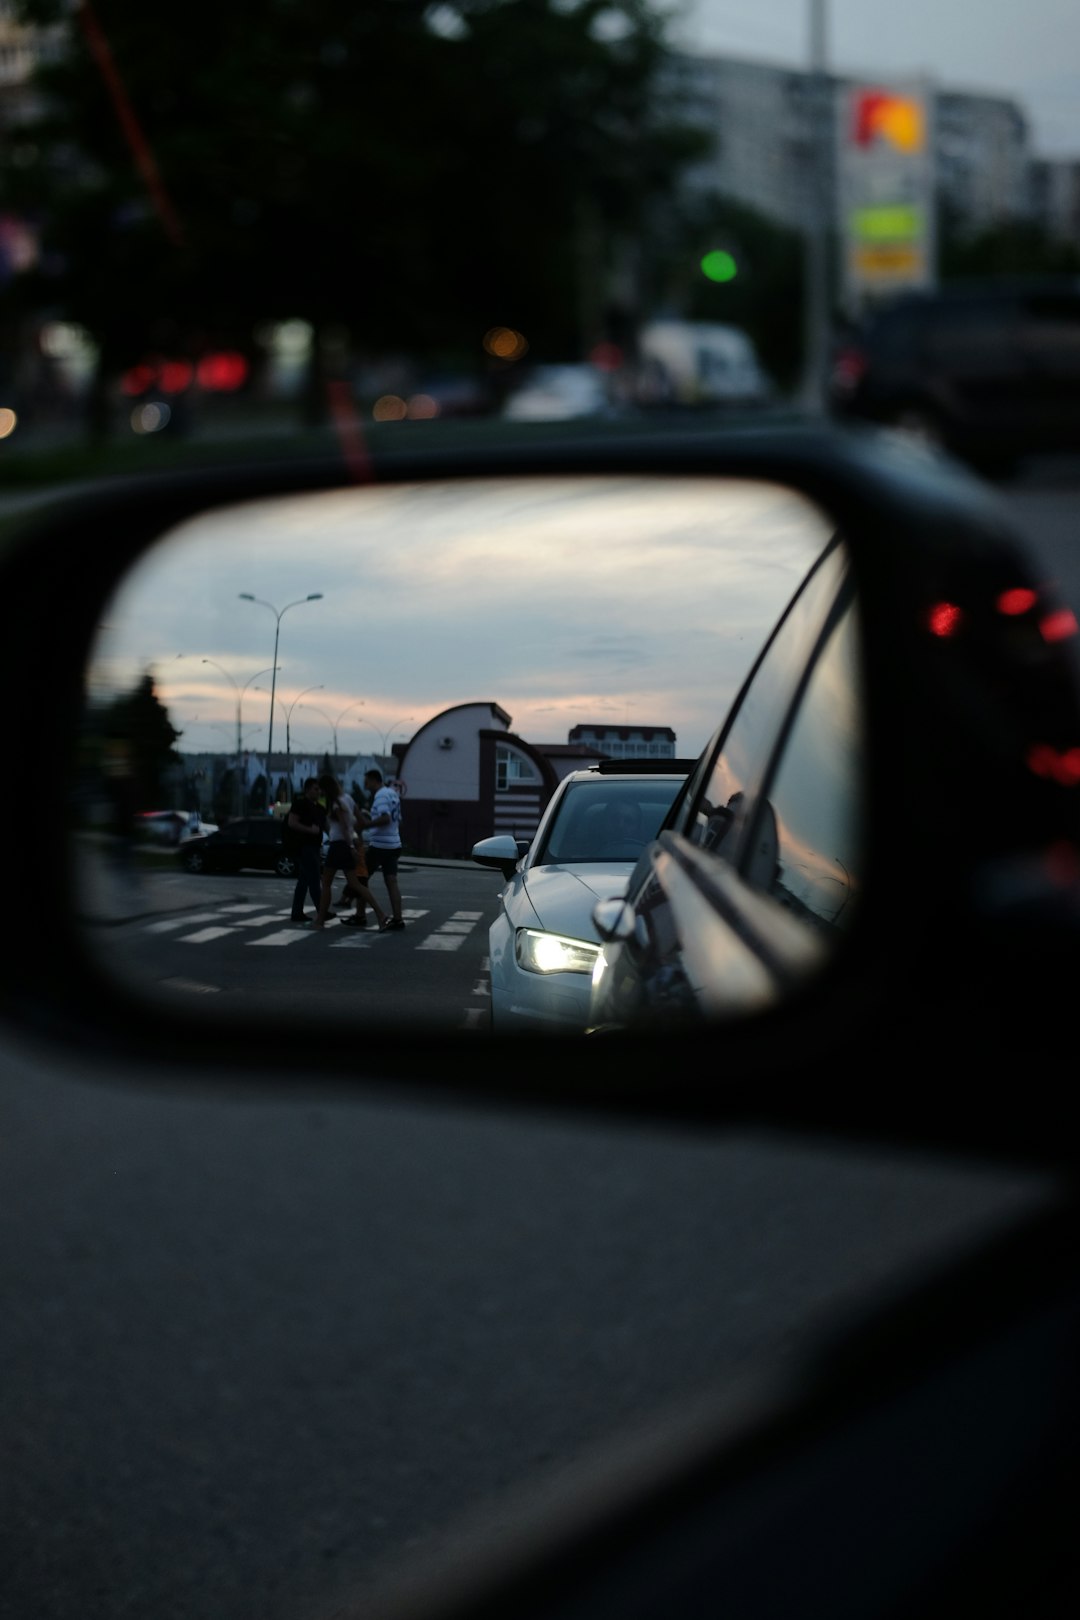 car side mirror showing cars on road during daytime